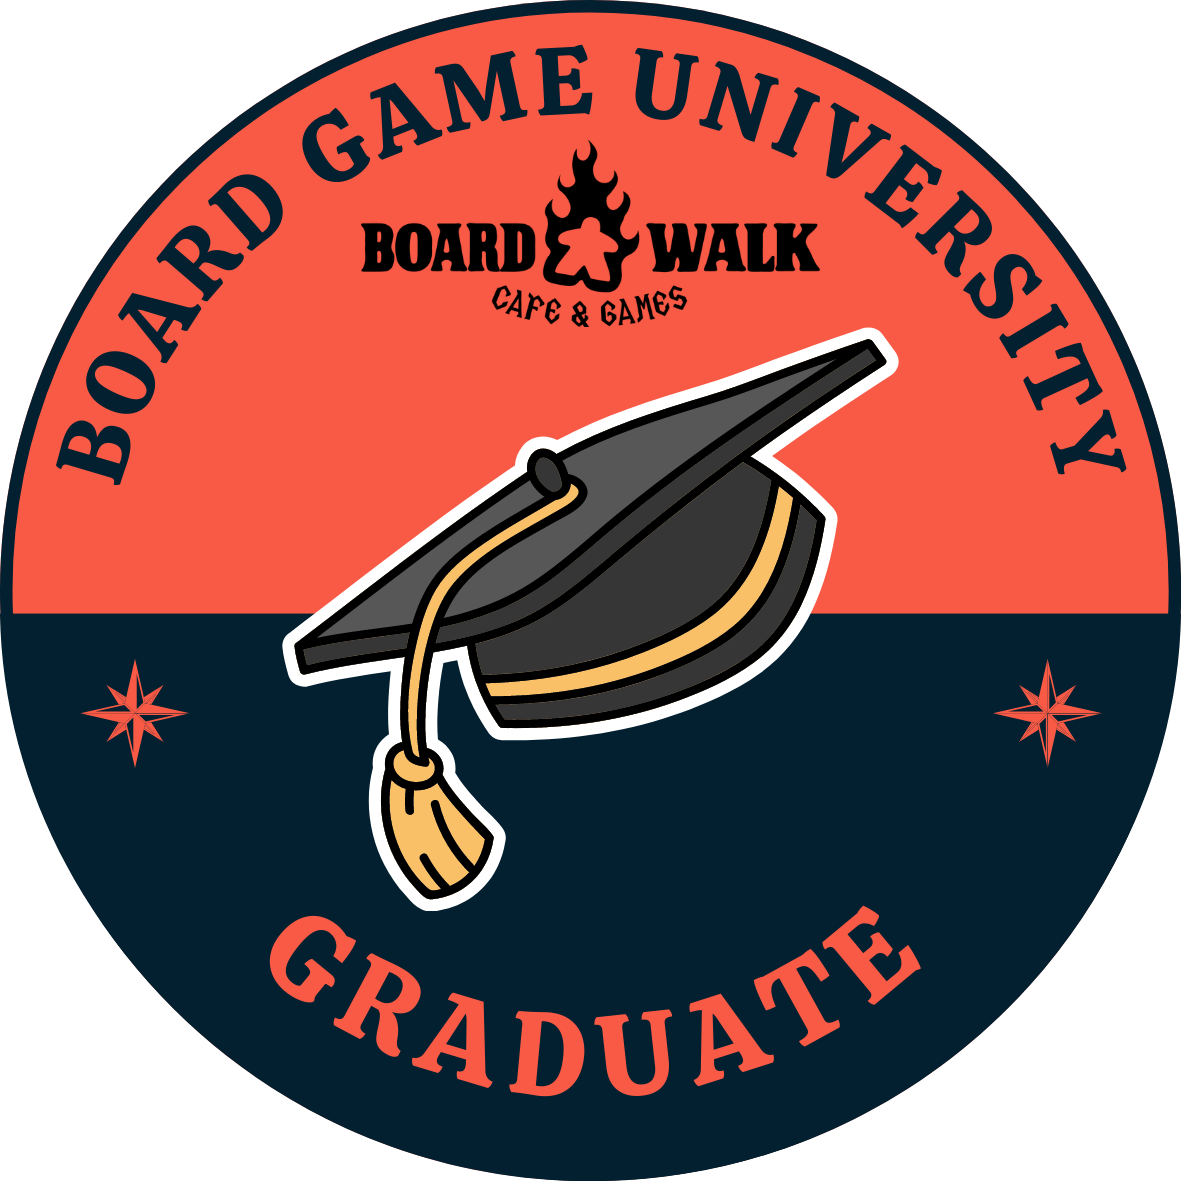 Top Two Player Games! — Boardwalk Cafe and Games Abbotsford